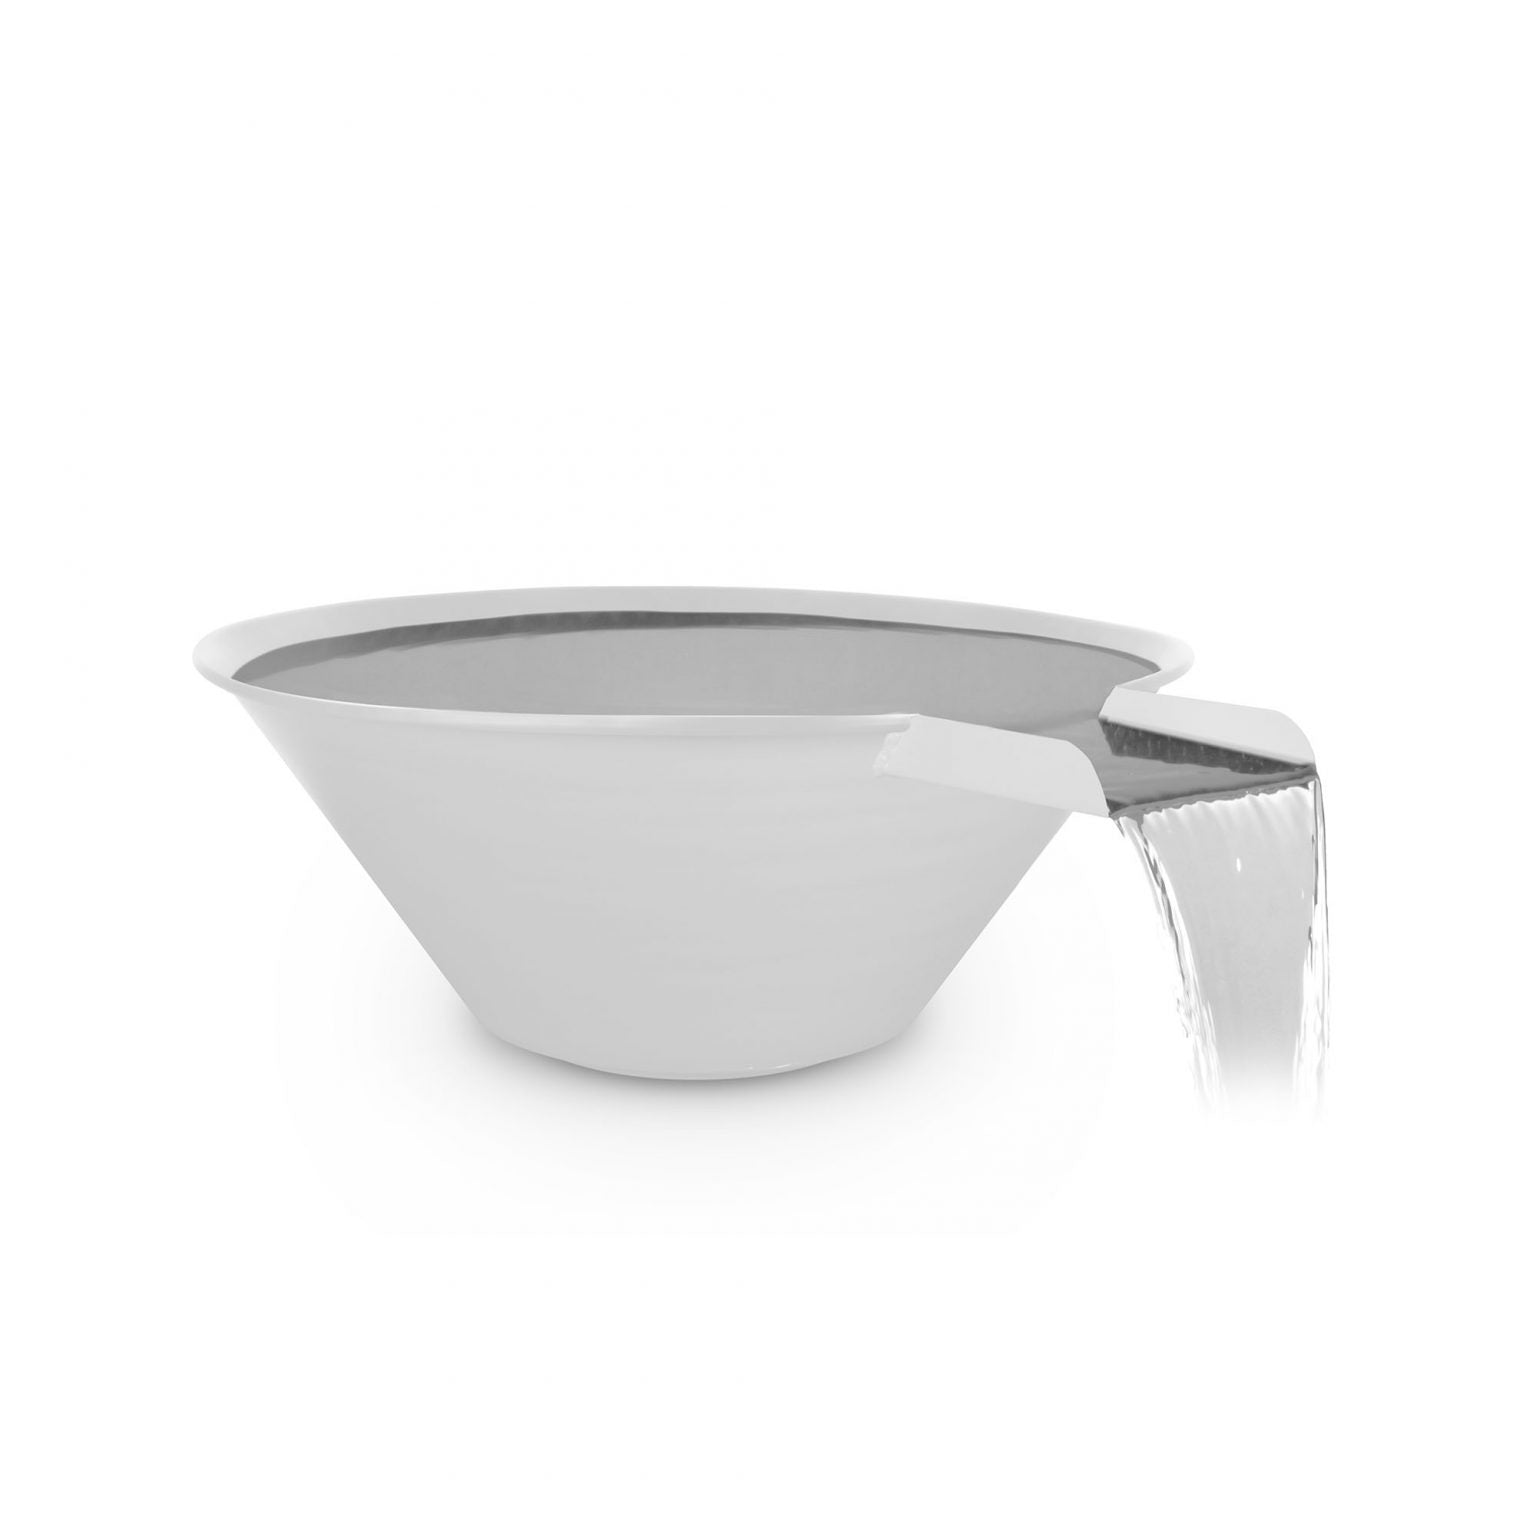 The Outdoor Plus Cazo Water Bowl Powder Coated Metal OPT-RXXPCWO - Serenity Provision